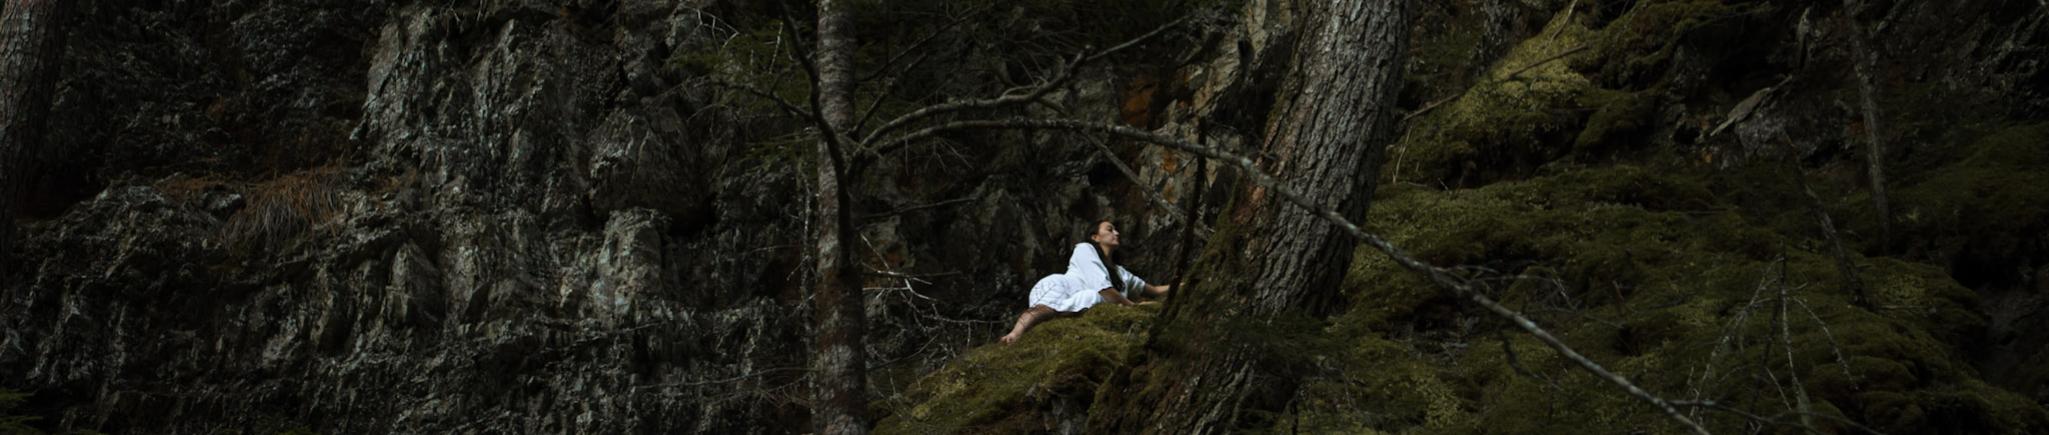 A woman wearing white lays down in a dark forest.